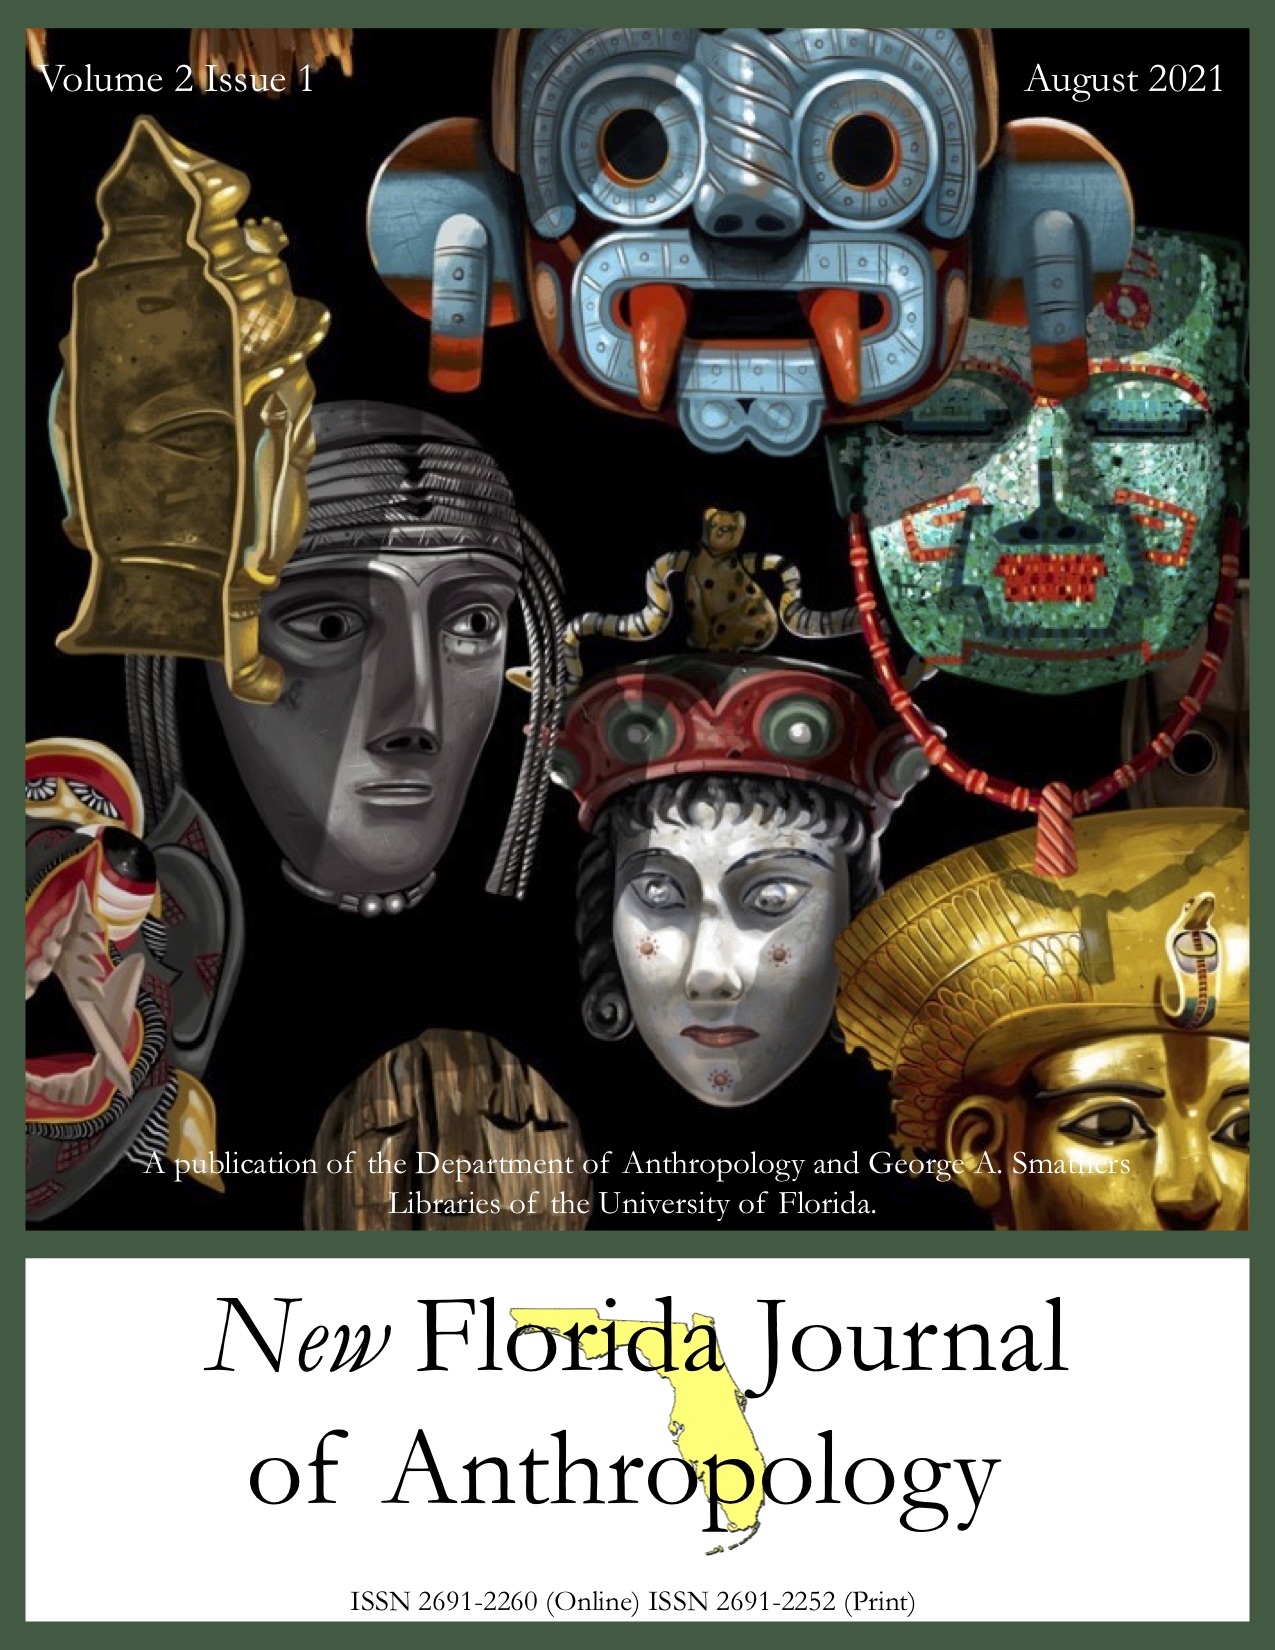 The cover design is artwork by Danielle Storey which includes a turquoise Aztec mask with feathers, Minoan mask with a white face and red and green head adornment, a gold Egyptian death mask, and a turquoise, obsidian, and shell mask from Teotihuacan. The logo, name, and ISSN of the New Florida Journal of Anthropology is also included.